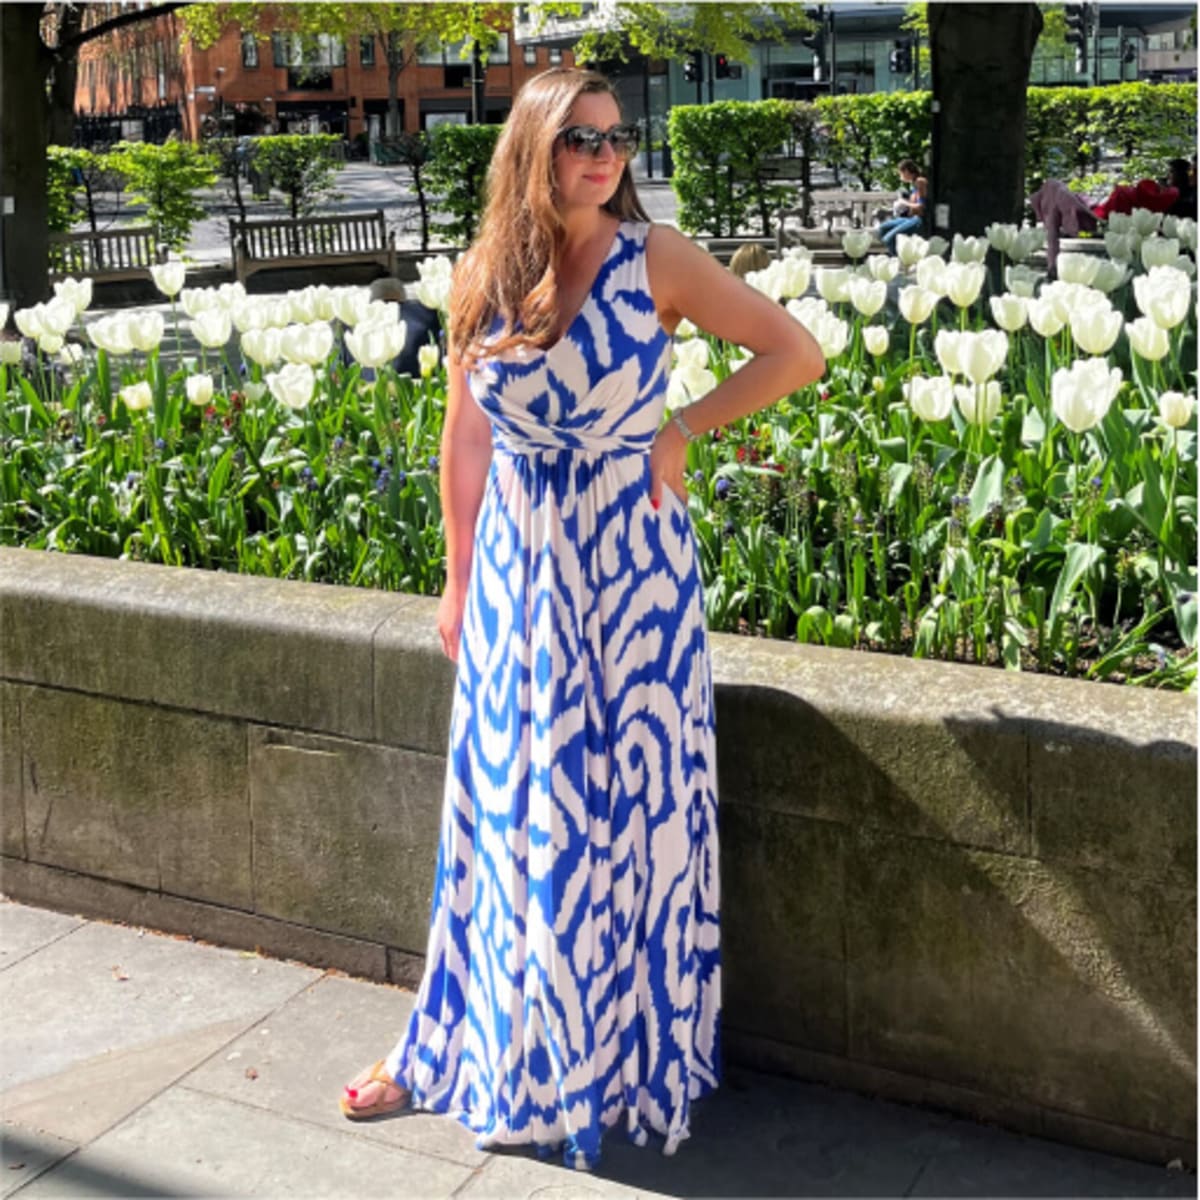 Woman wearing blue and white abstract print dress